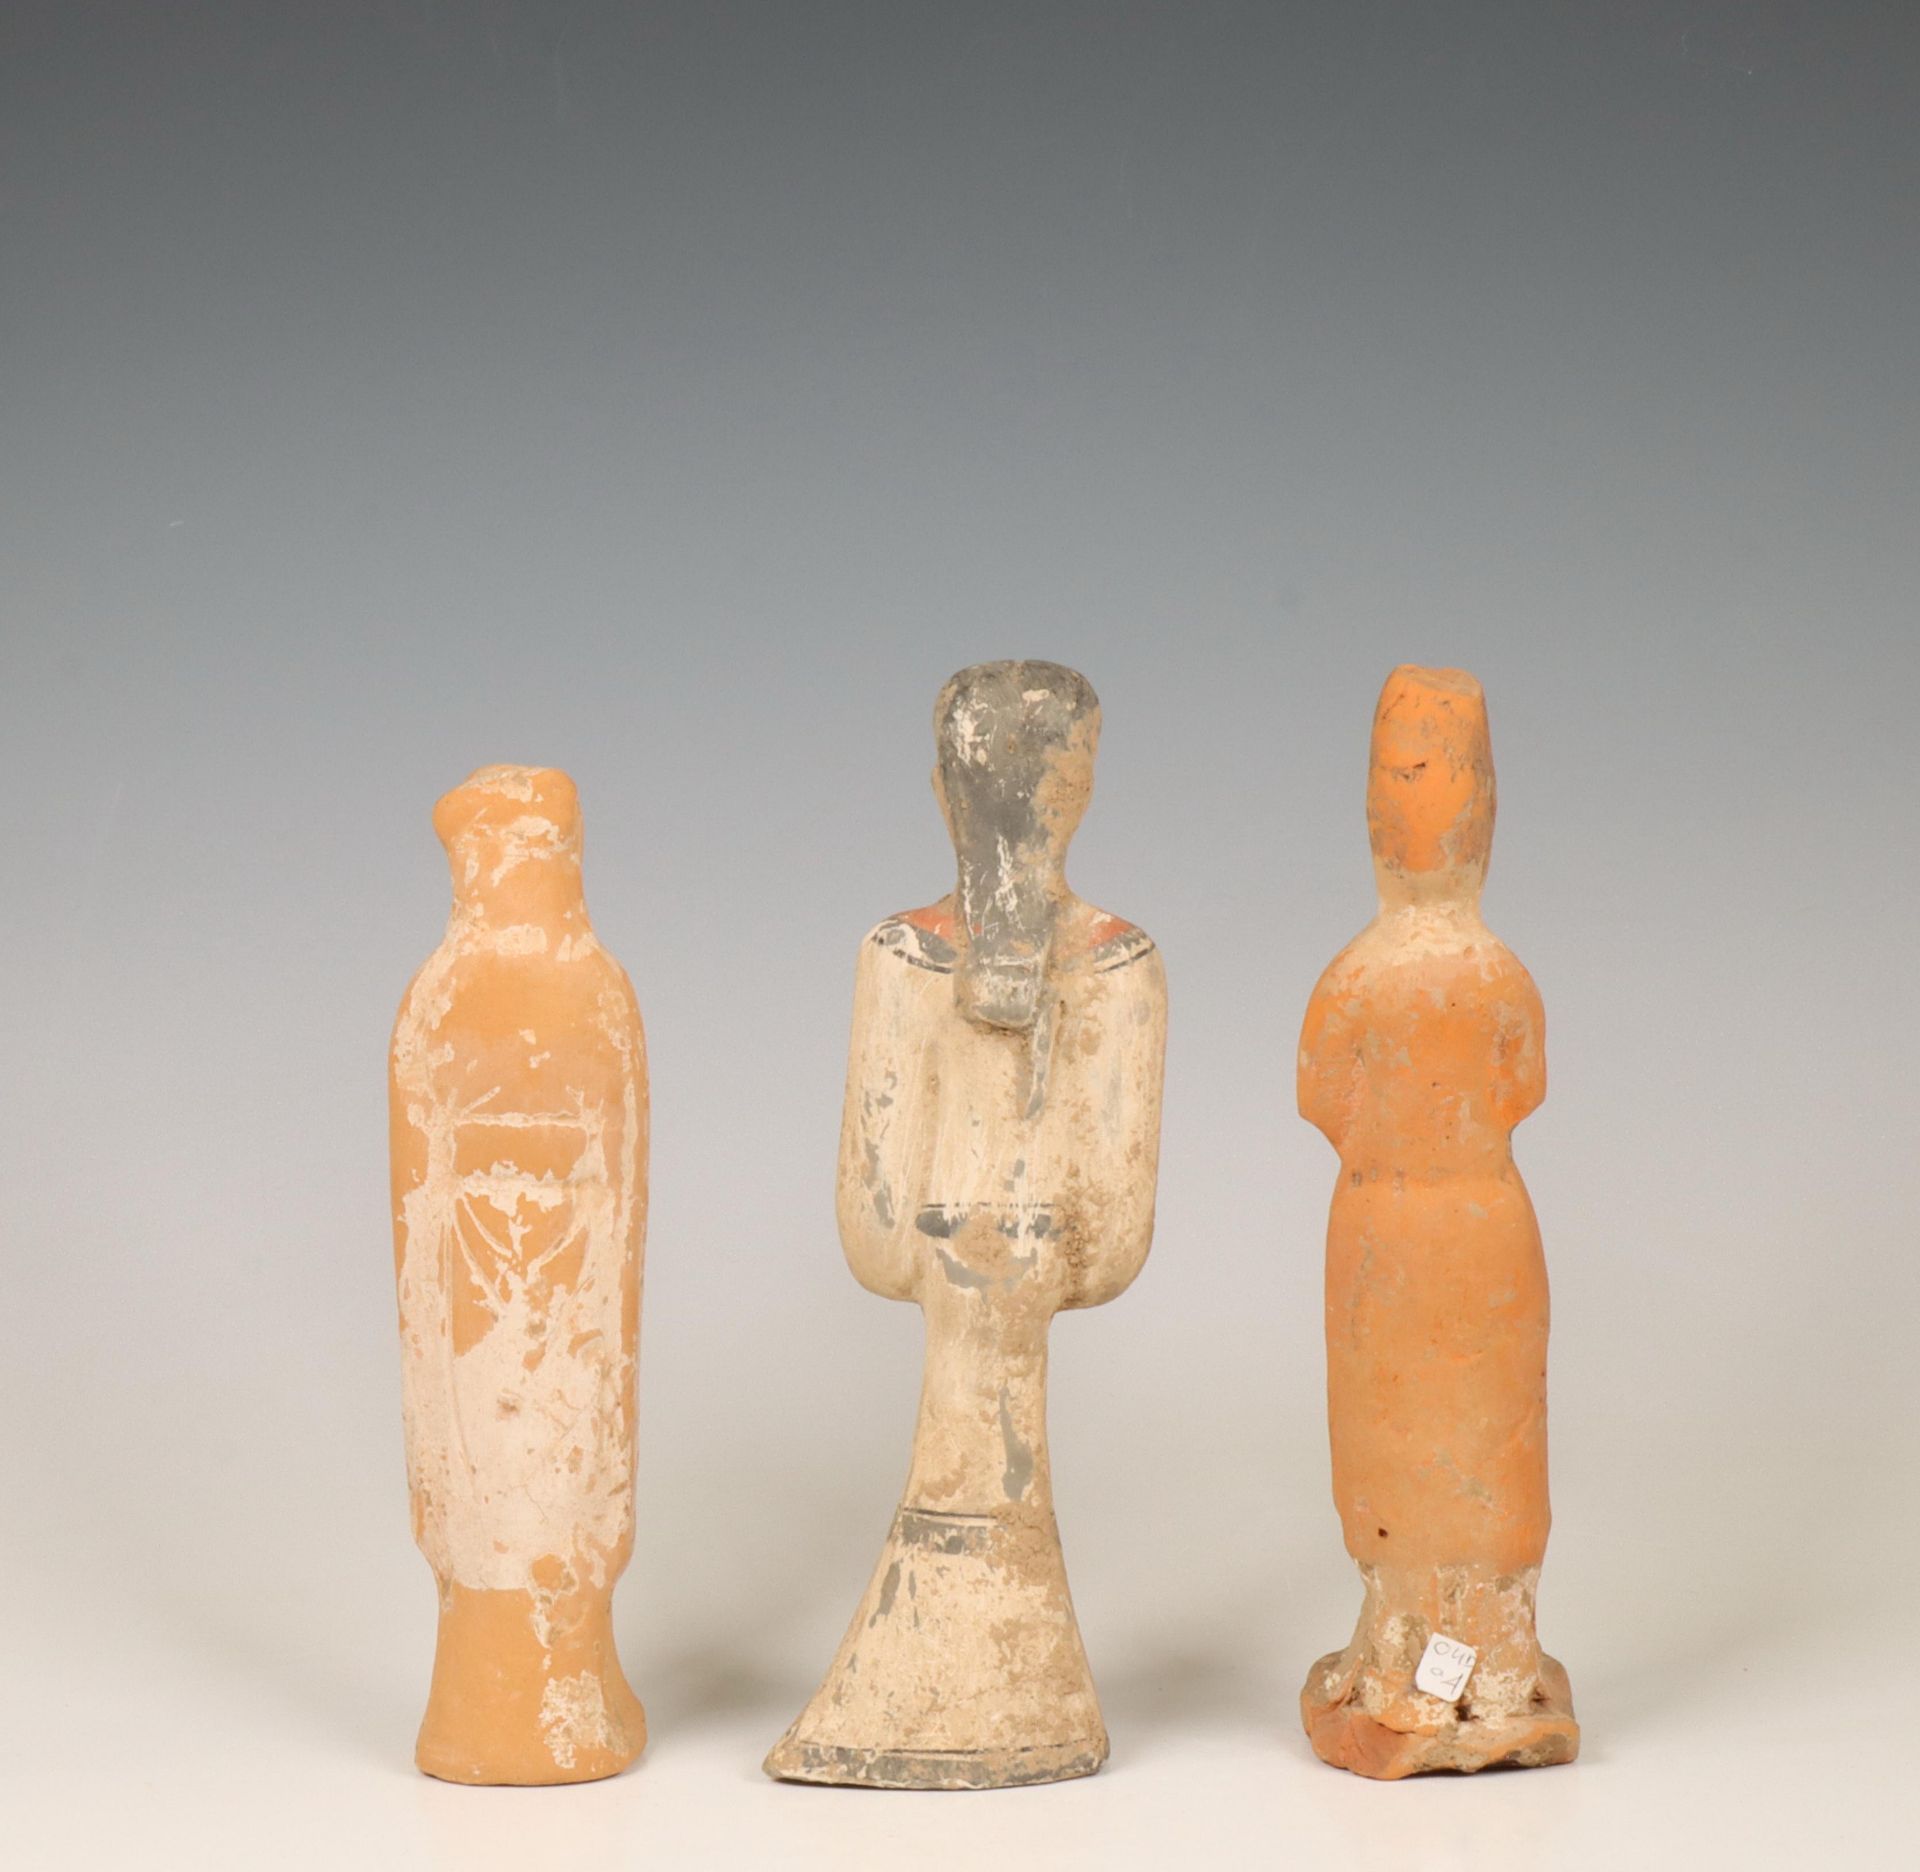 China, three pottery figures, possibly Han dynasty (206 BC-220 AD), - Image 3 of 3